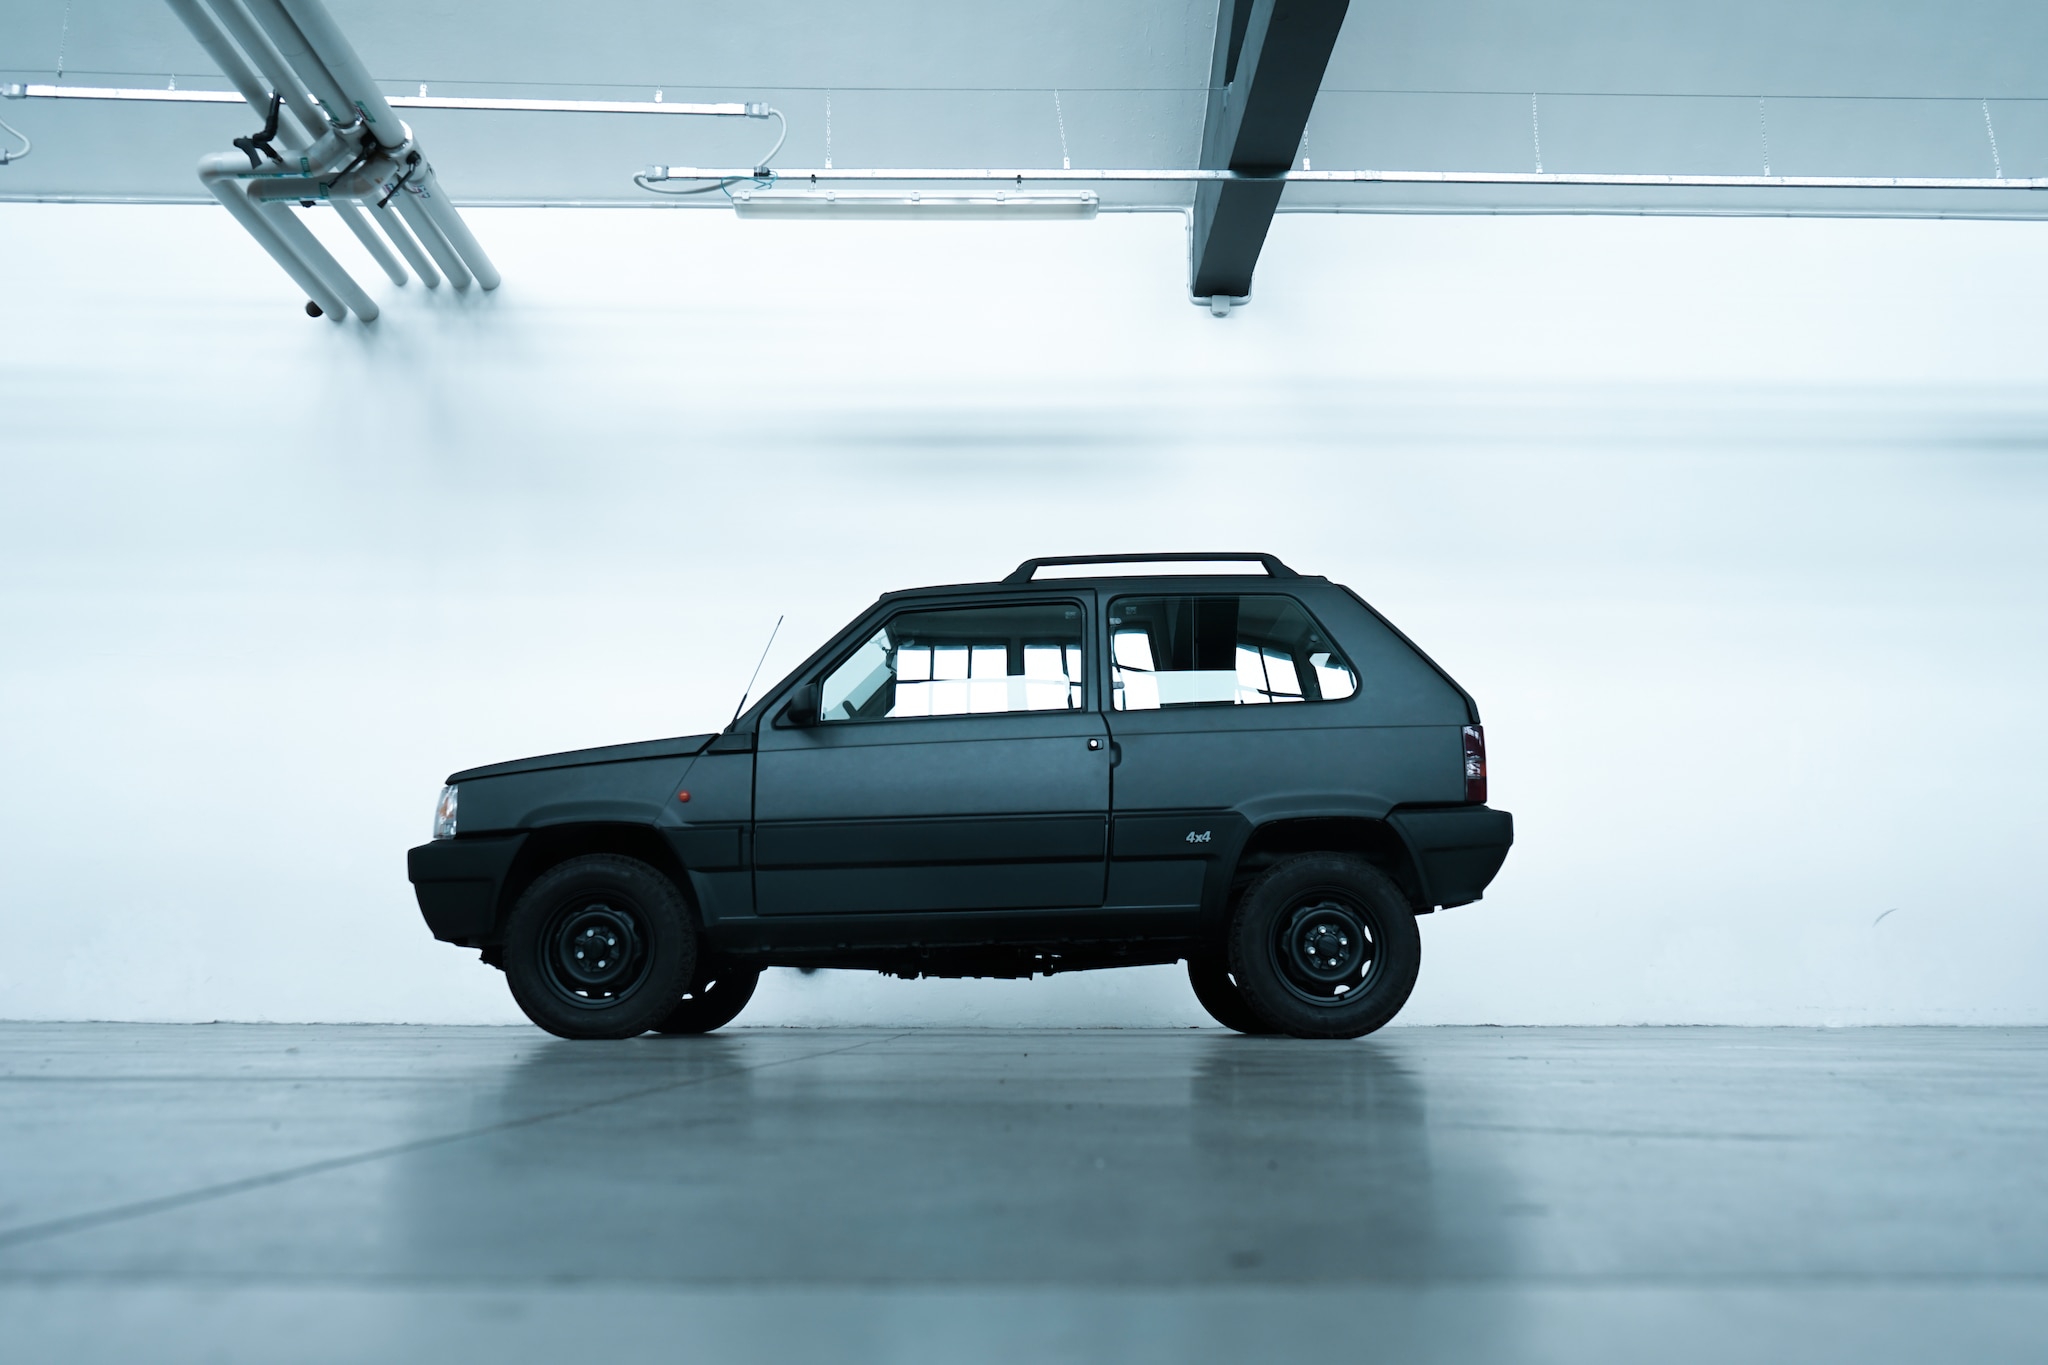 The Fiat Panda 4x4, 40 years of adventure to the max